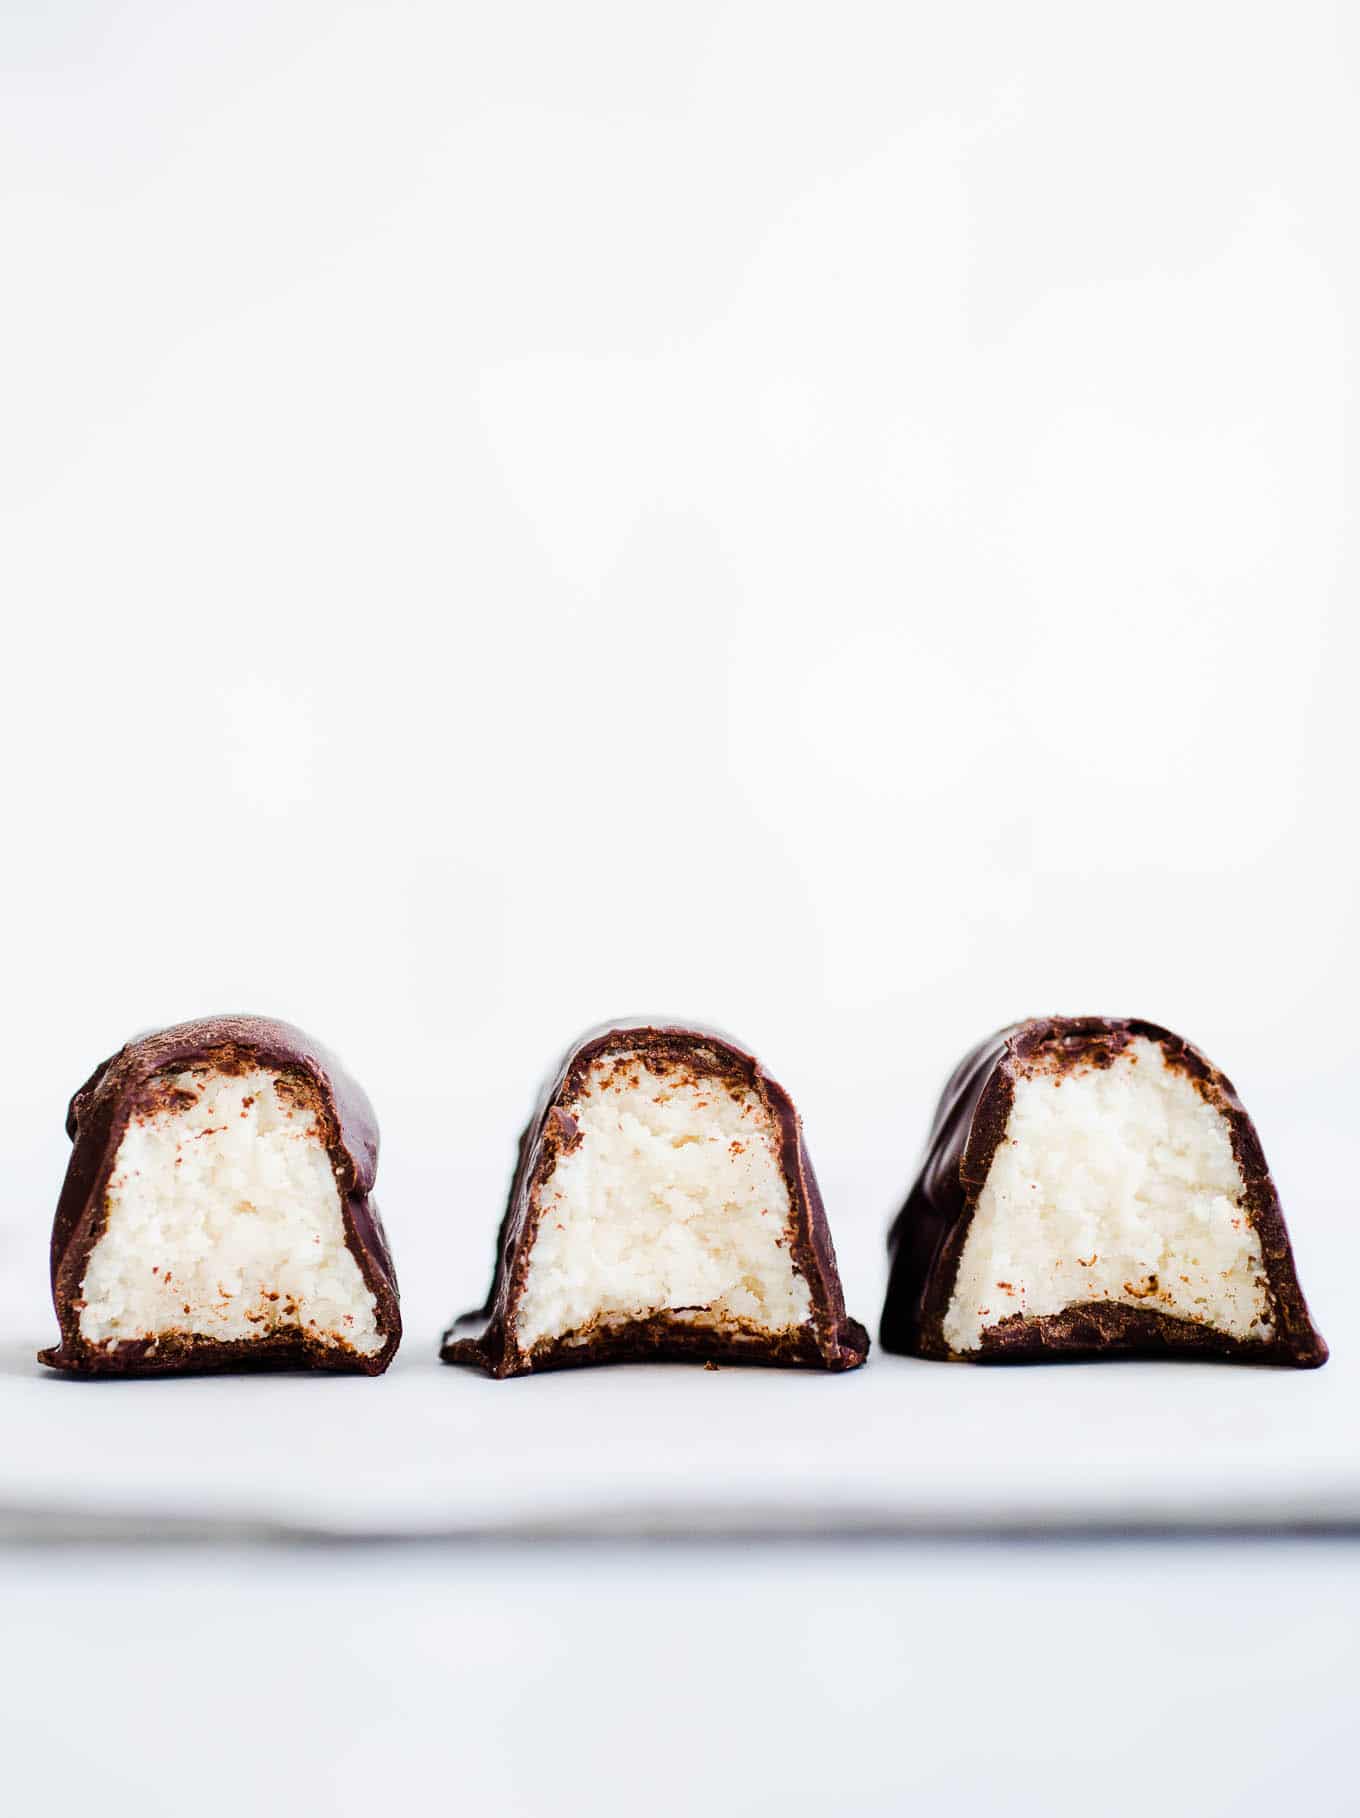 Chocolate coconut candy